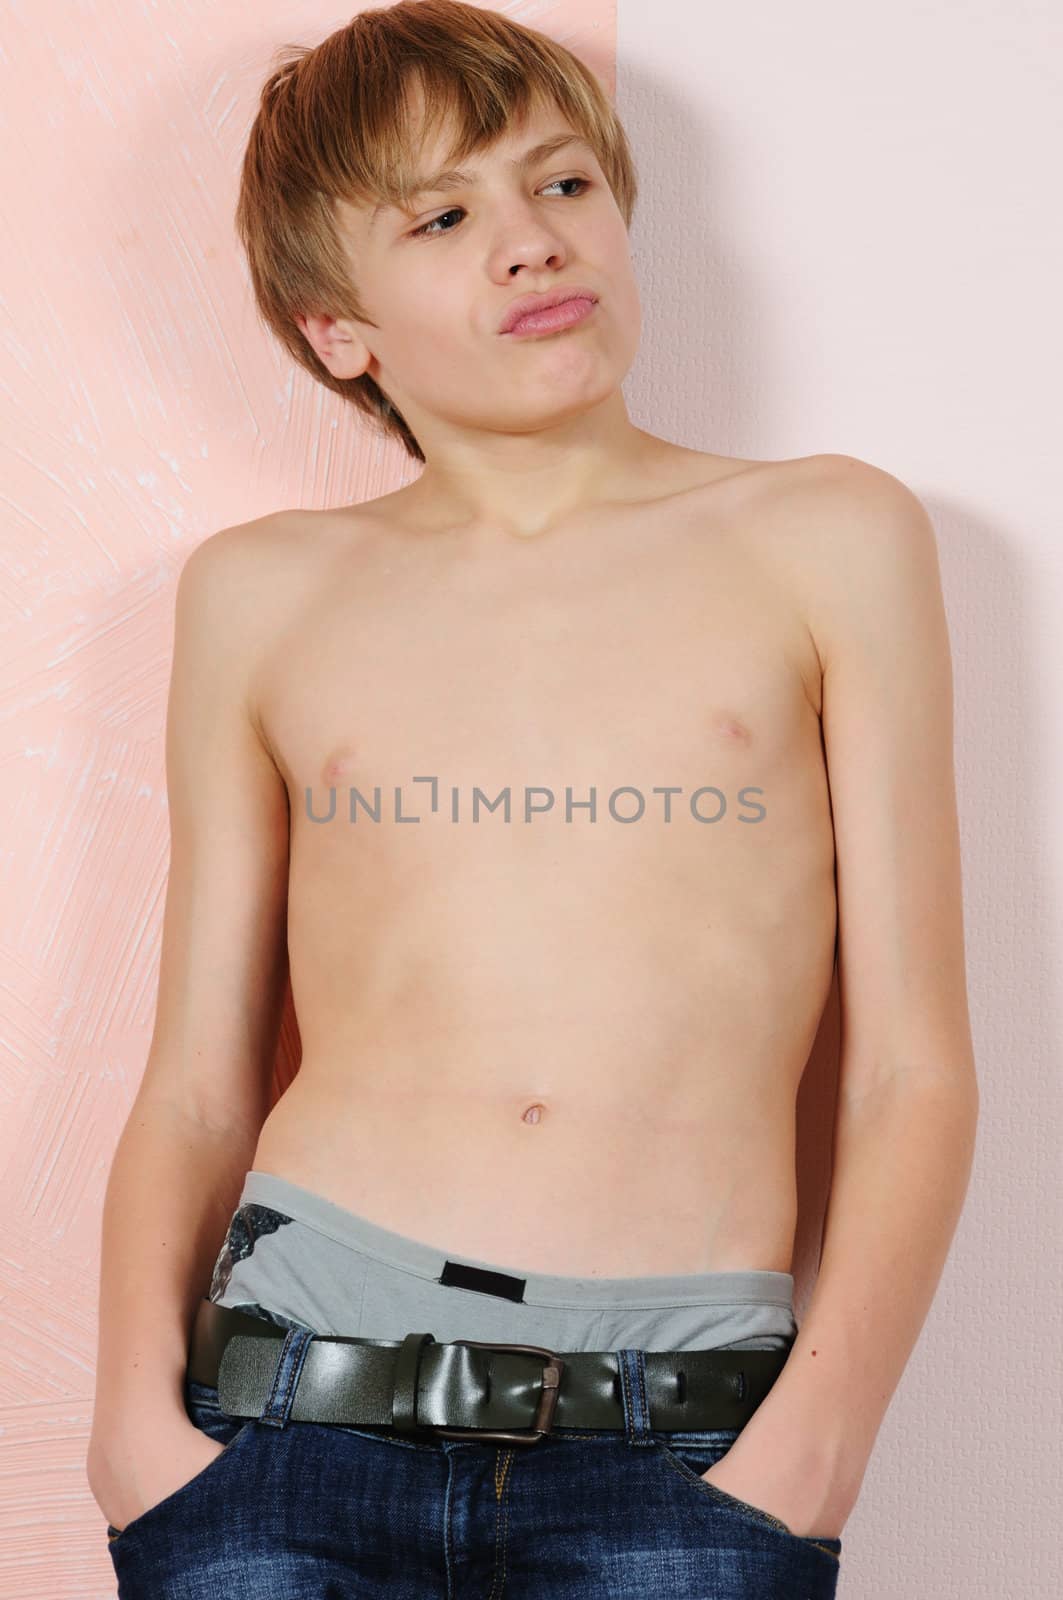 The teenager without a shirt near a wall